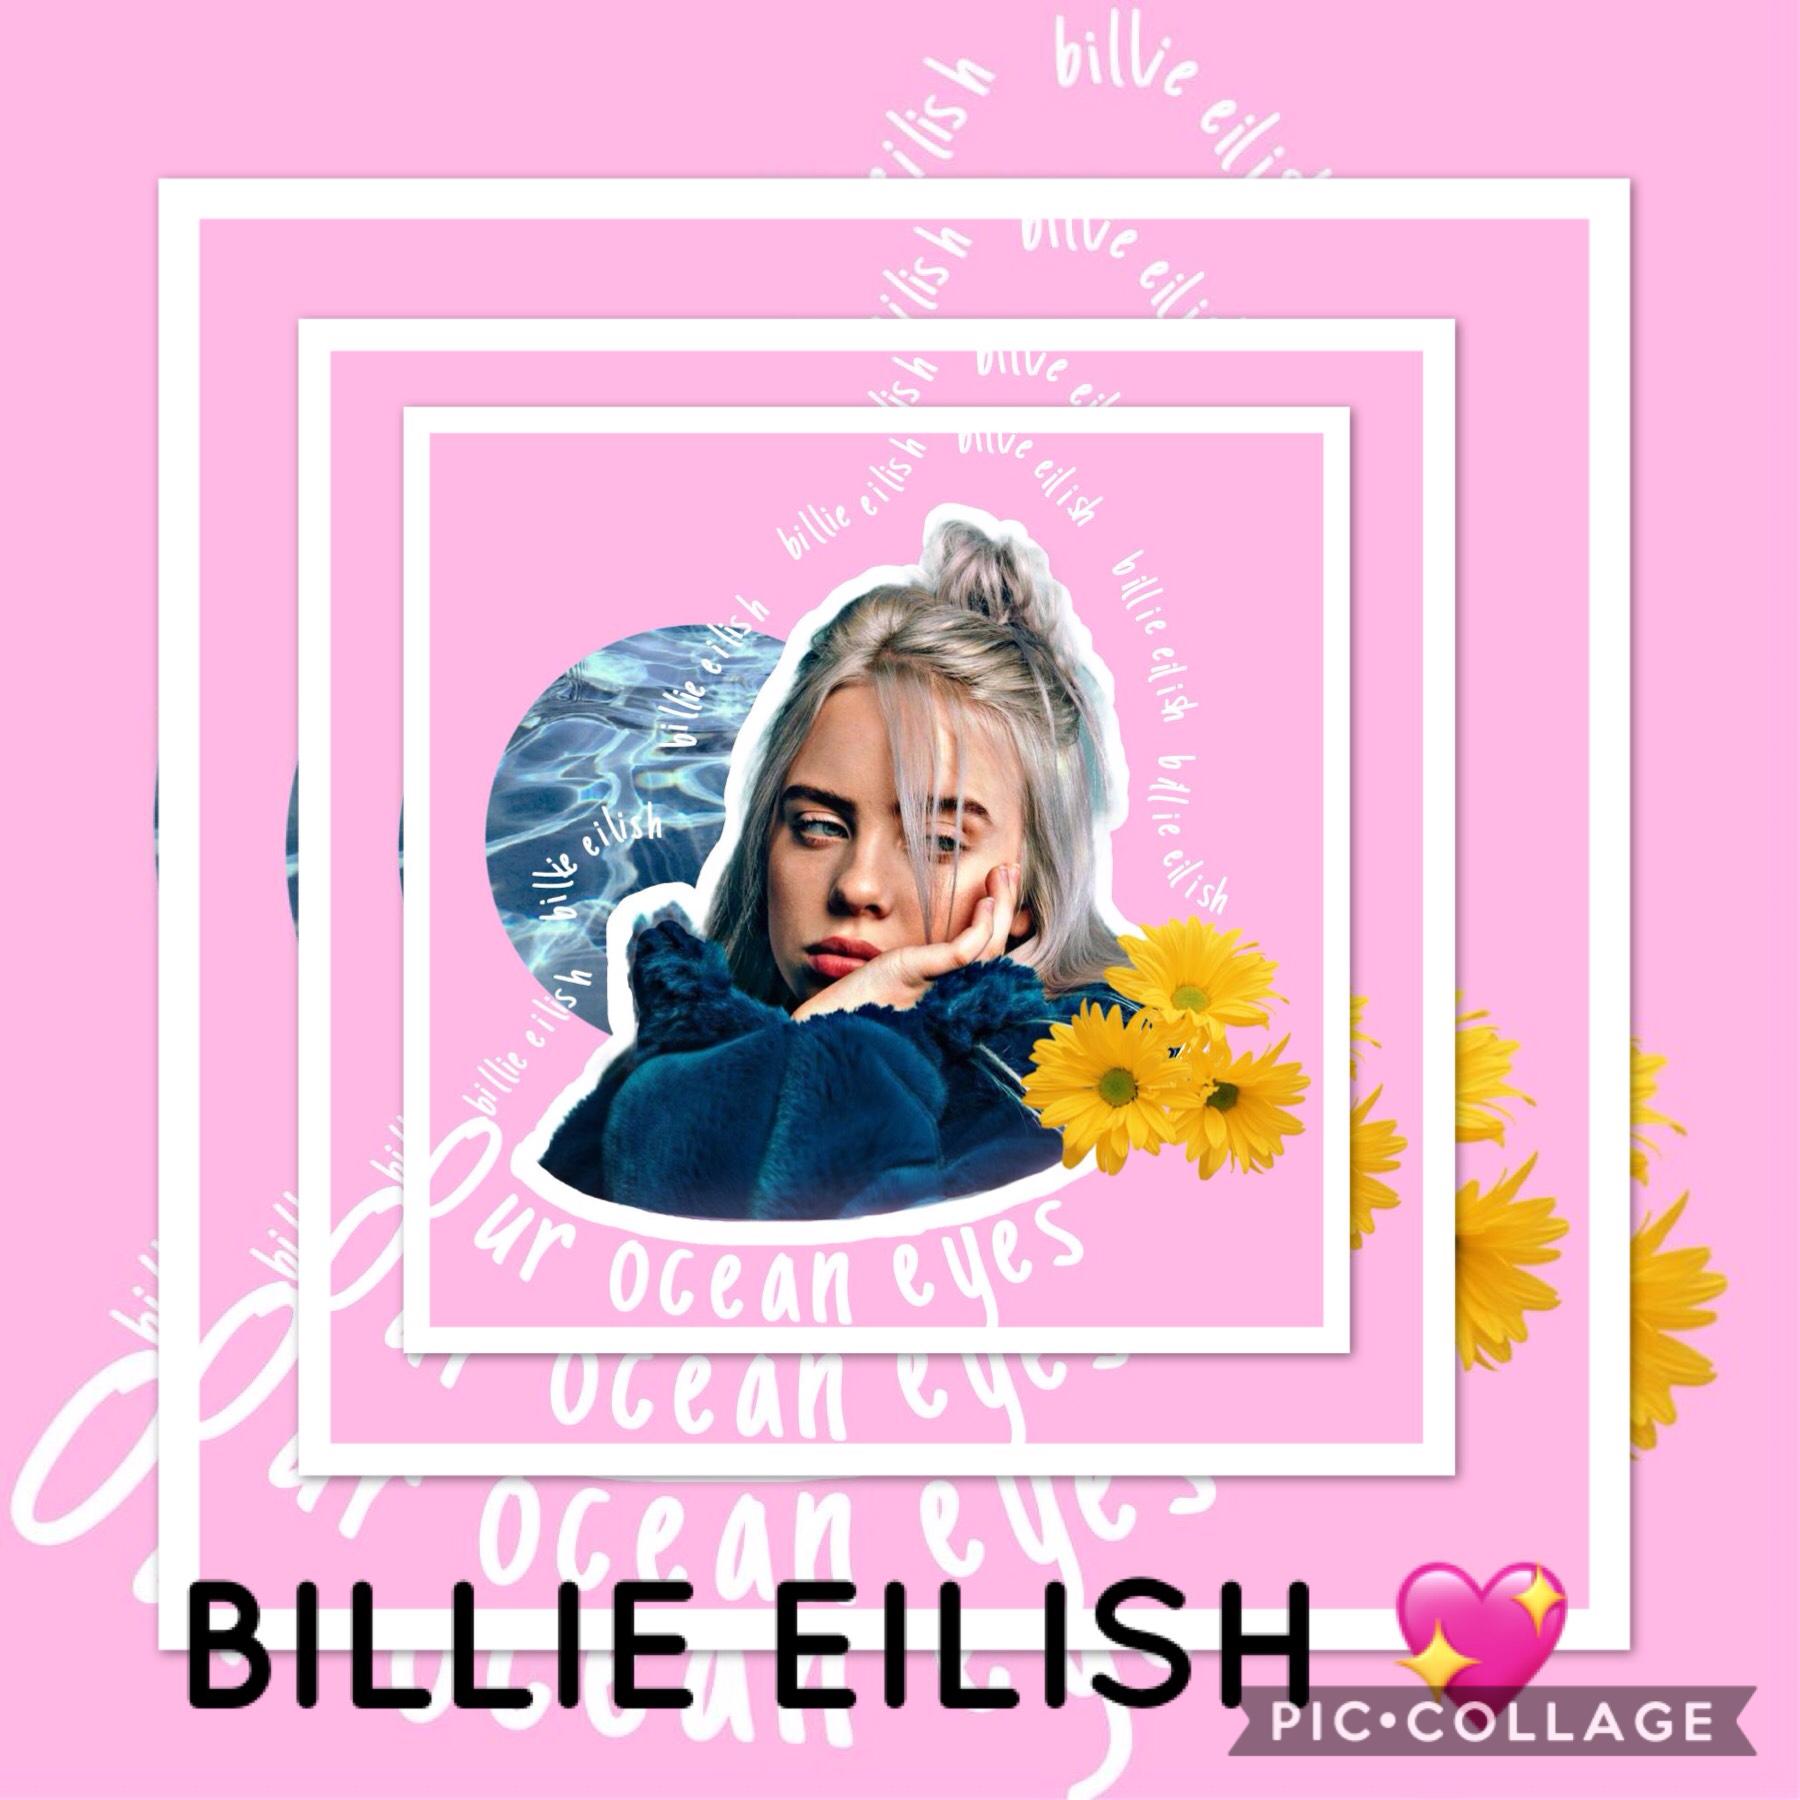 #BillieEilish 💖💖 comment who your favourite music artist 🎶 